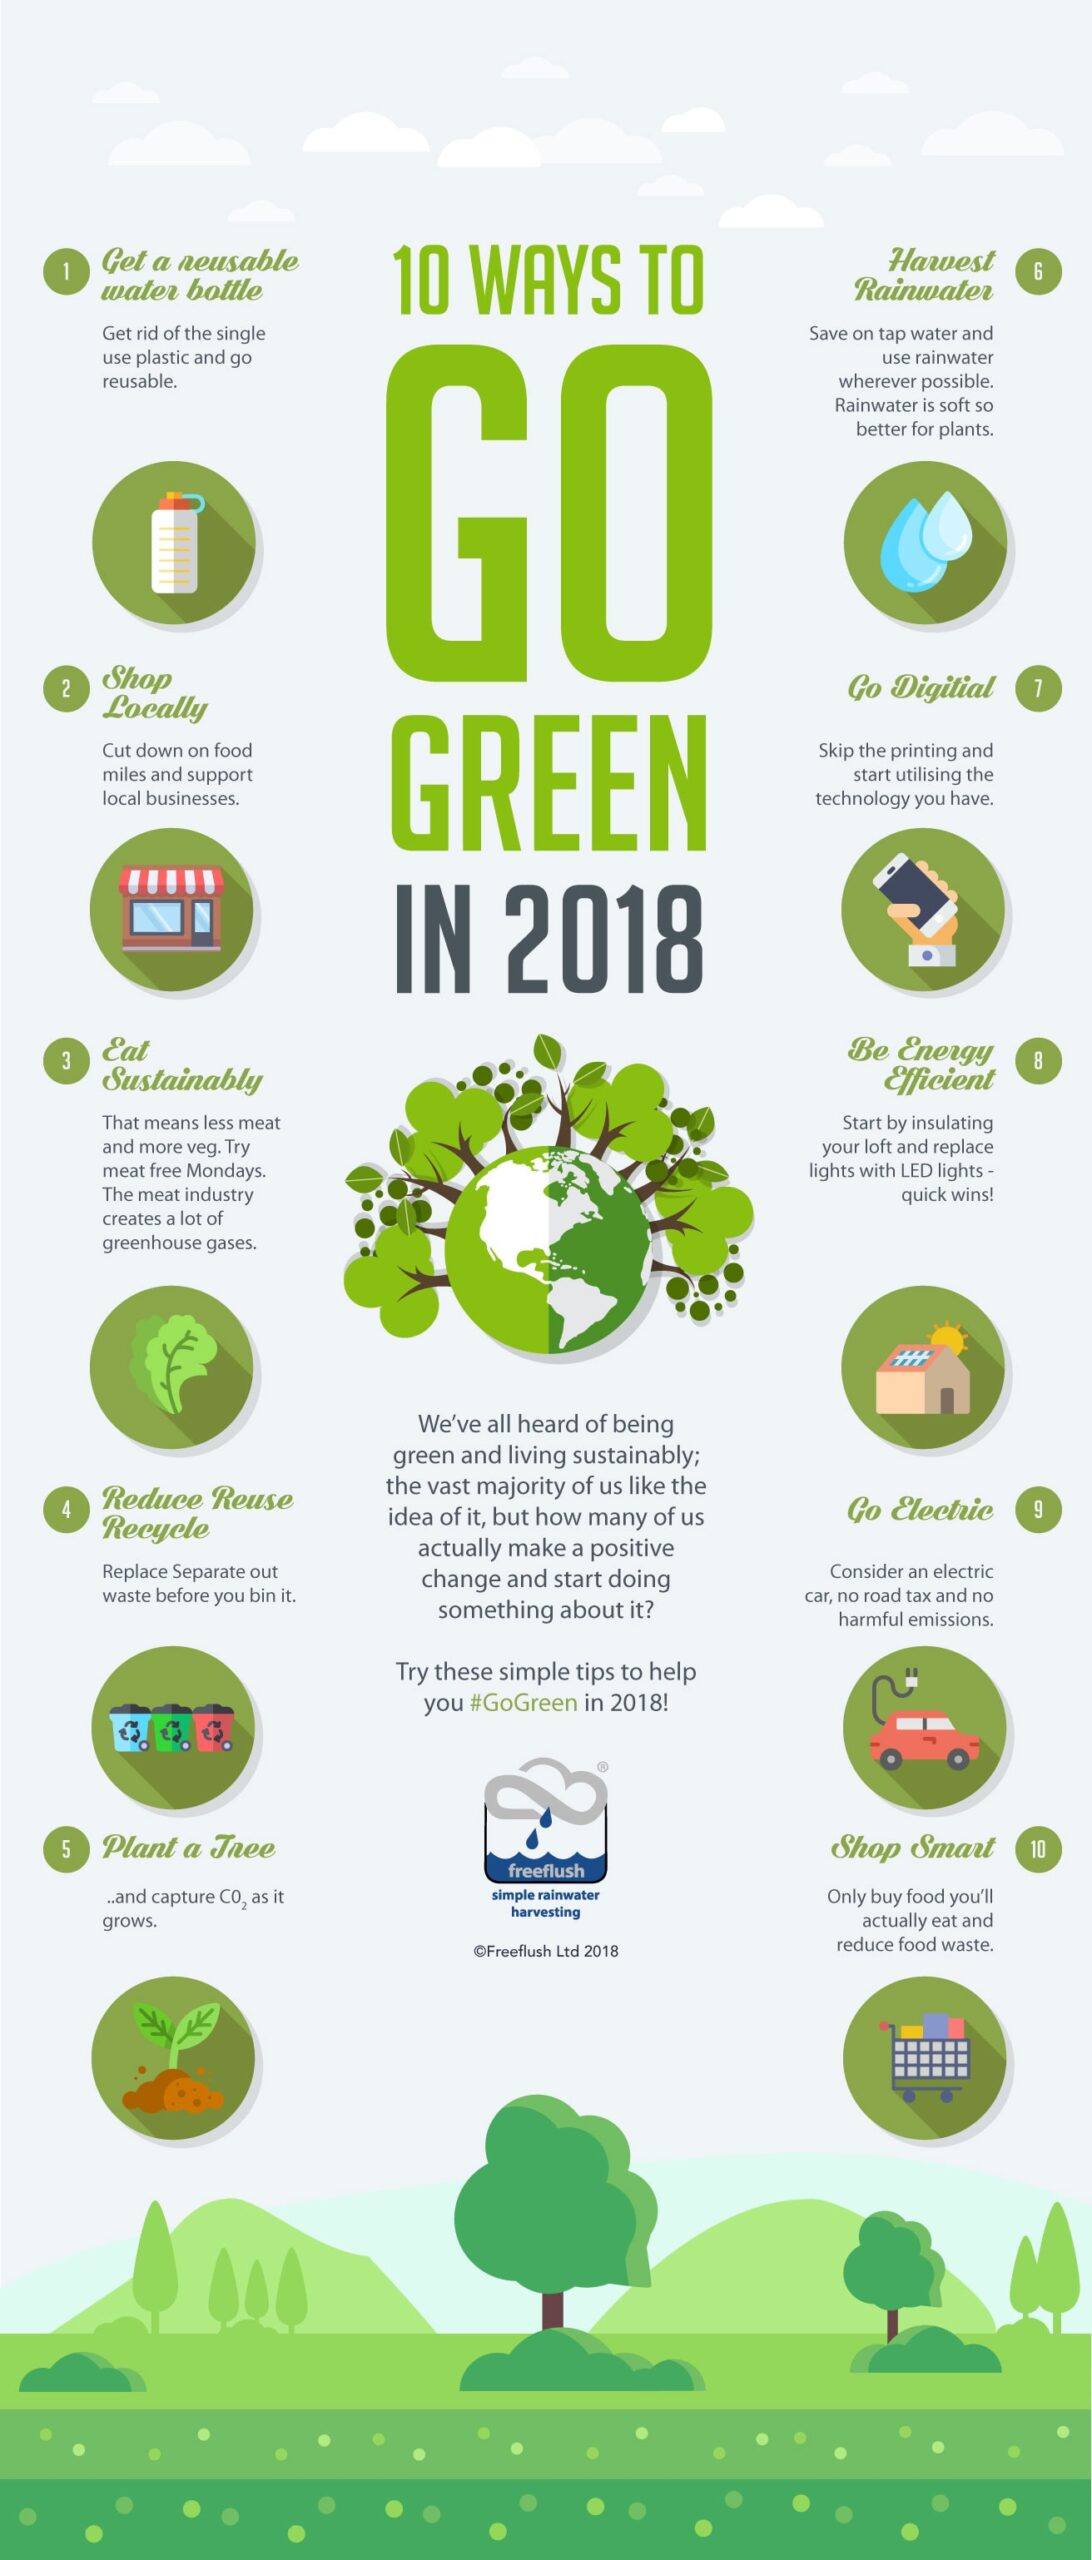 b"Growing Innovation with OurCrowds GreenTech Portfolio [Infographic] - OurCrowd Blog"